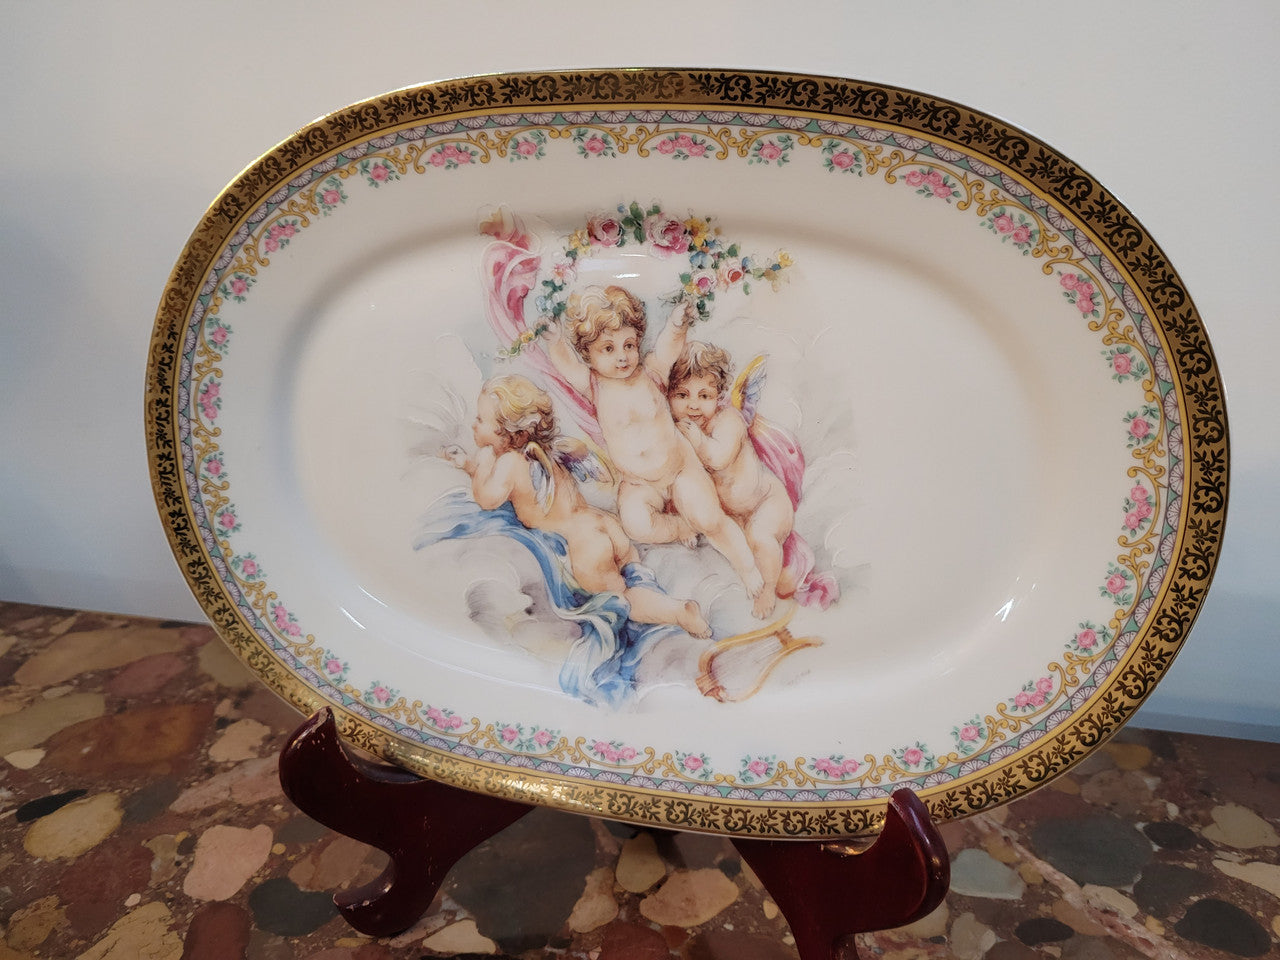 Attractive Plate “T Limoges” Featuring 3 Cherubs With Roses